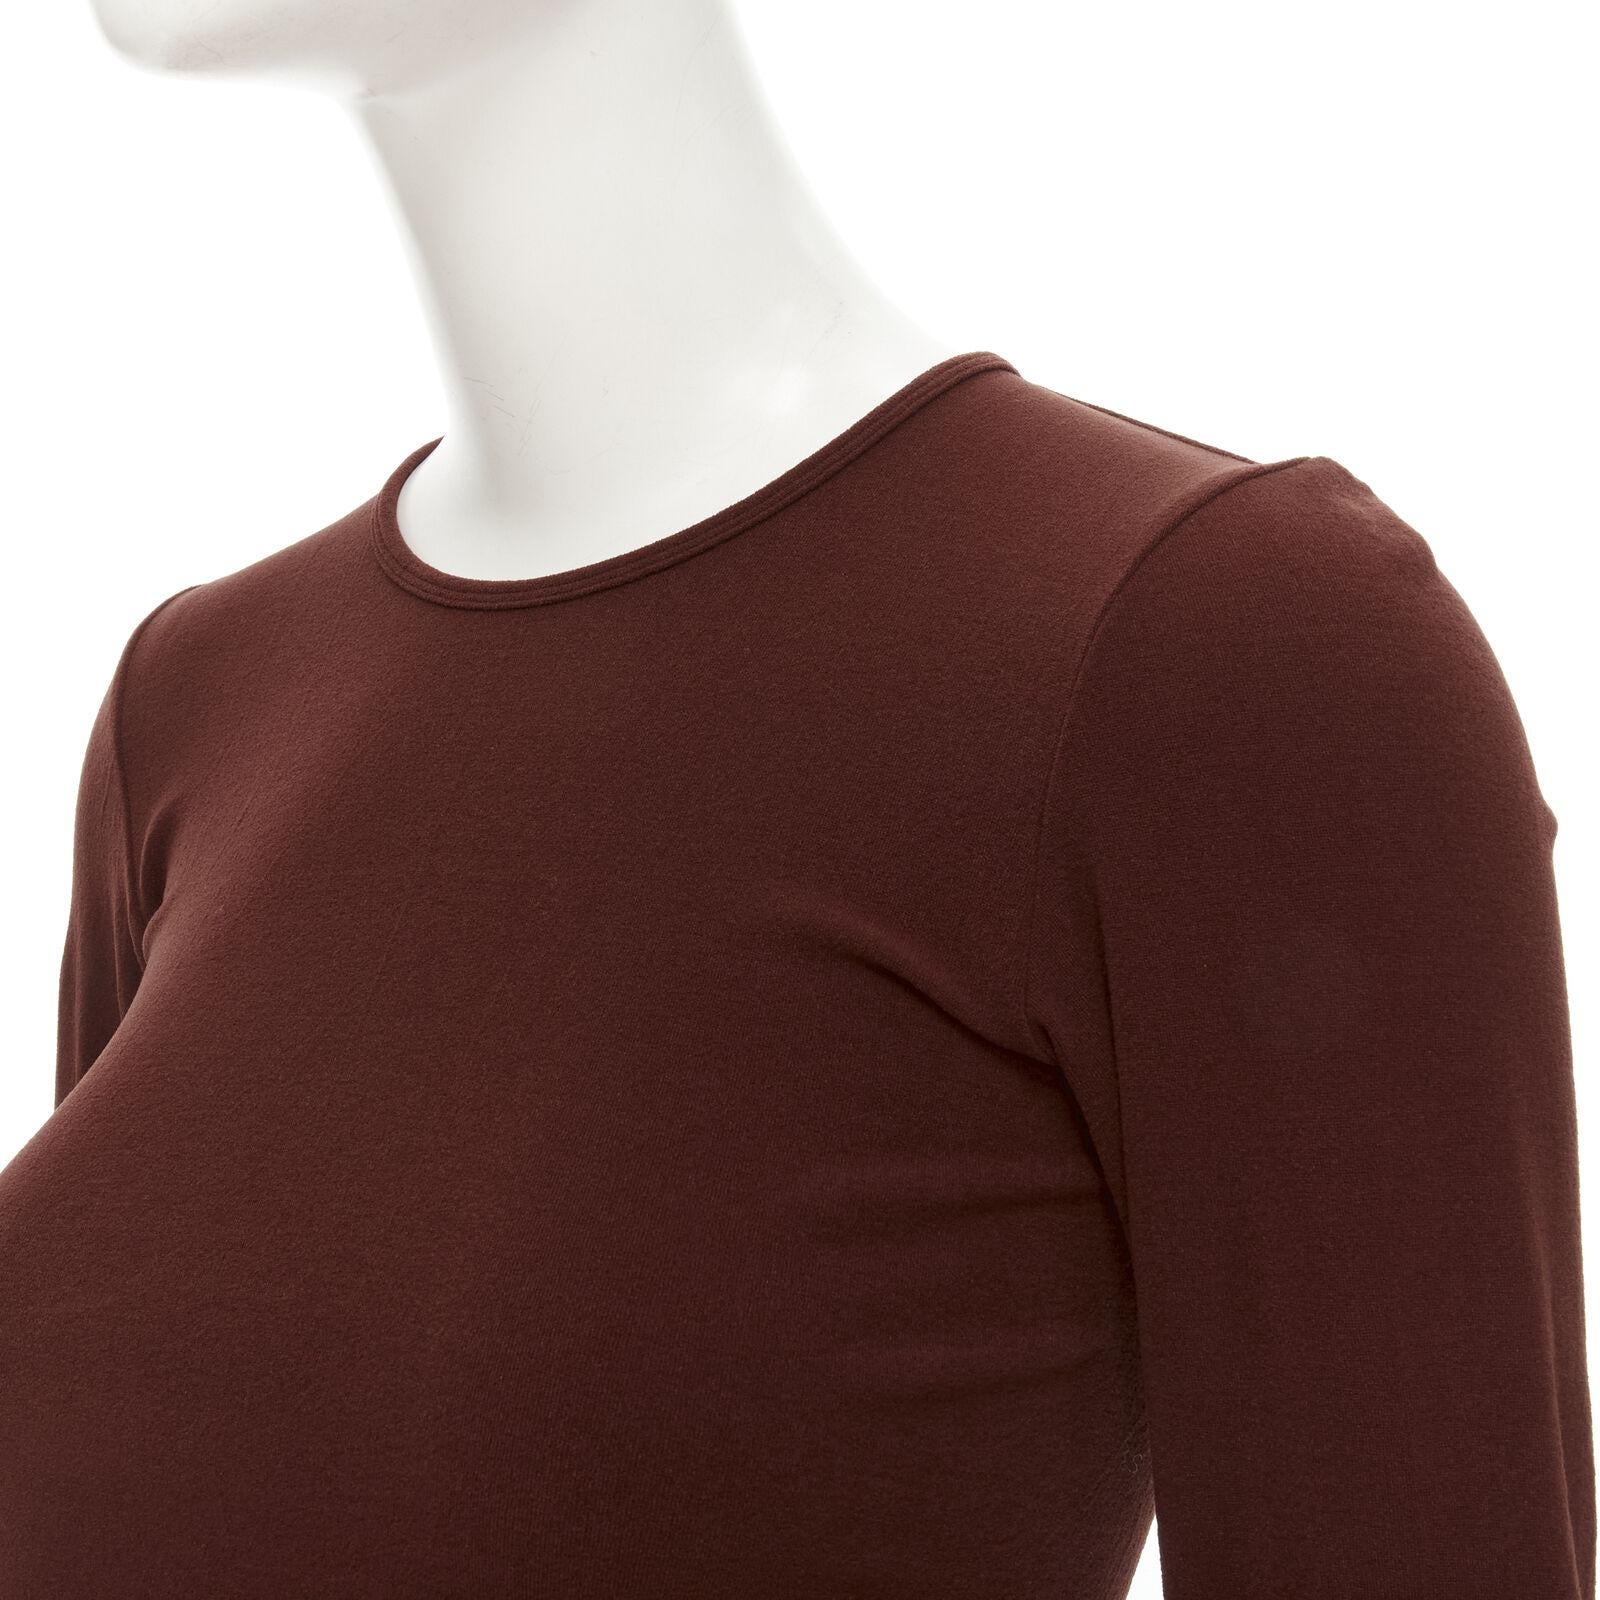 COMME DES GARCONS 1997 Lumps Bumps brown nylon blend crew neck knit cropped top
Reference: CRTI/A00734
Brand: Comme Des Garcons
Designer: Rei Kawakubo
Collection: 1997
Material: Nylon, Blend
Color: Brown
Pattern: Solid
Closure: Pull On
Made in: